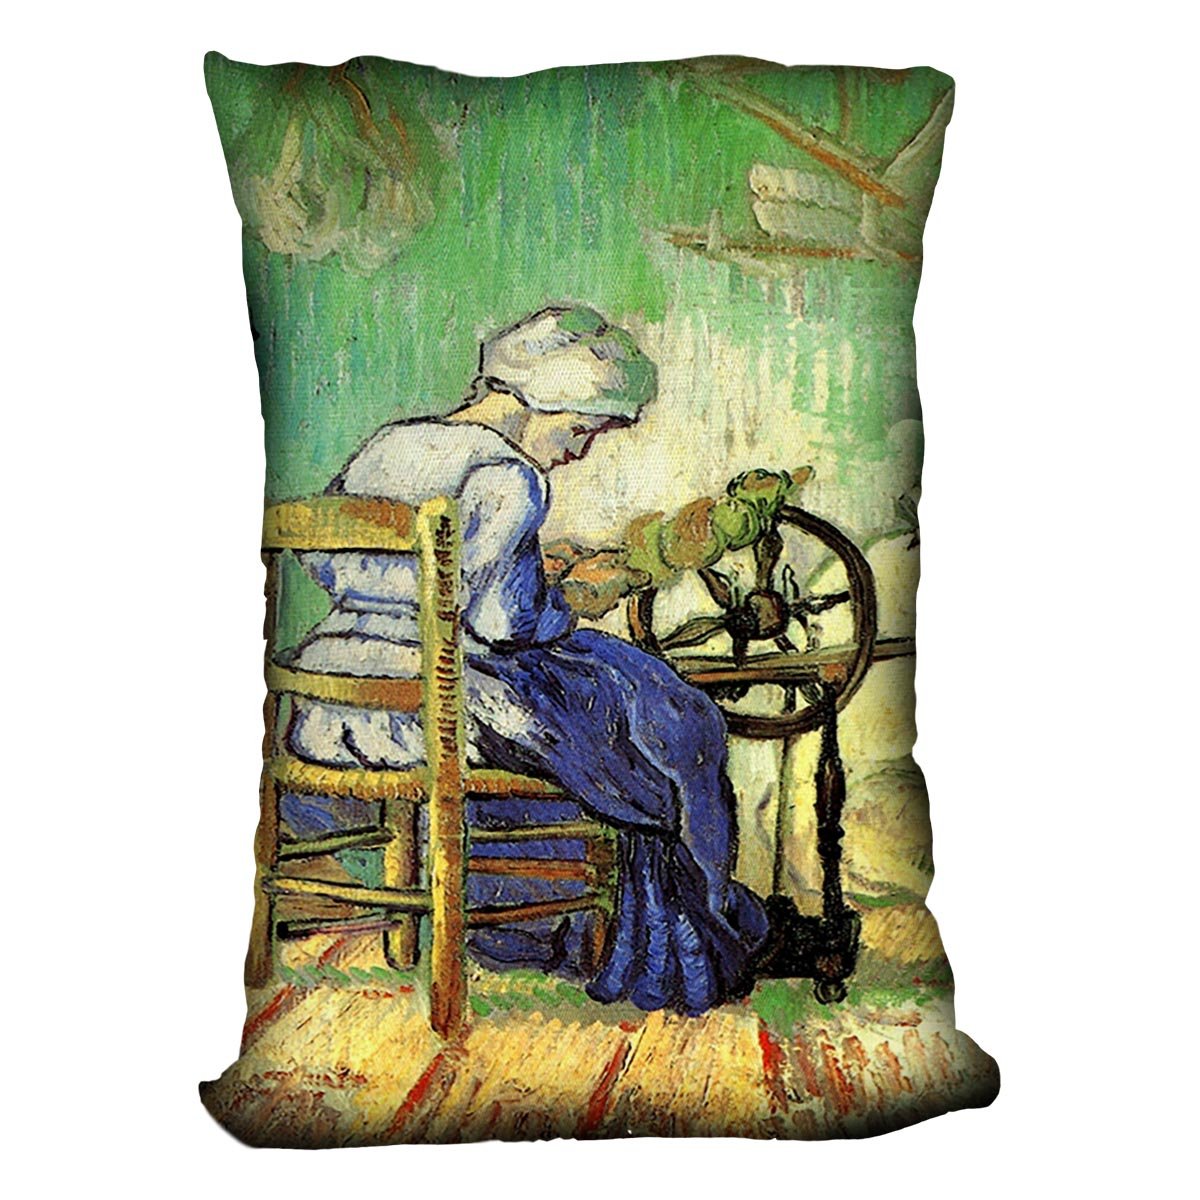 The Spinner by Van Gogh Throw Pillow